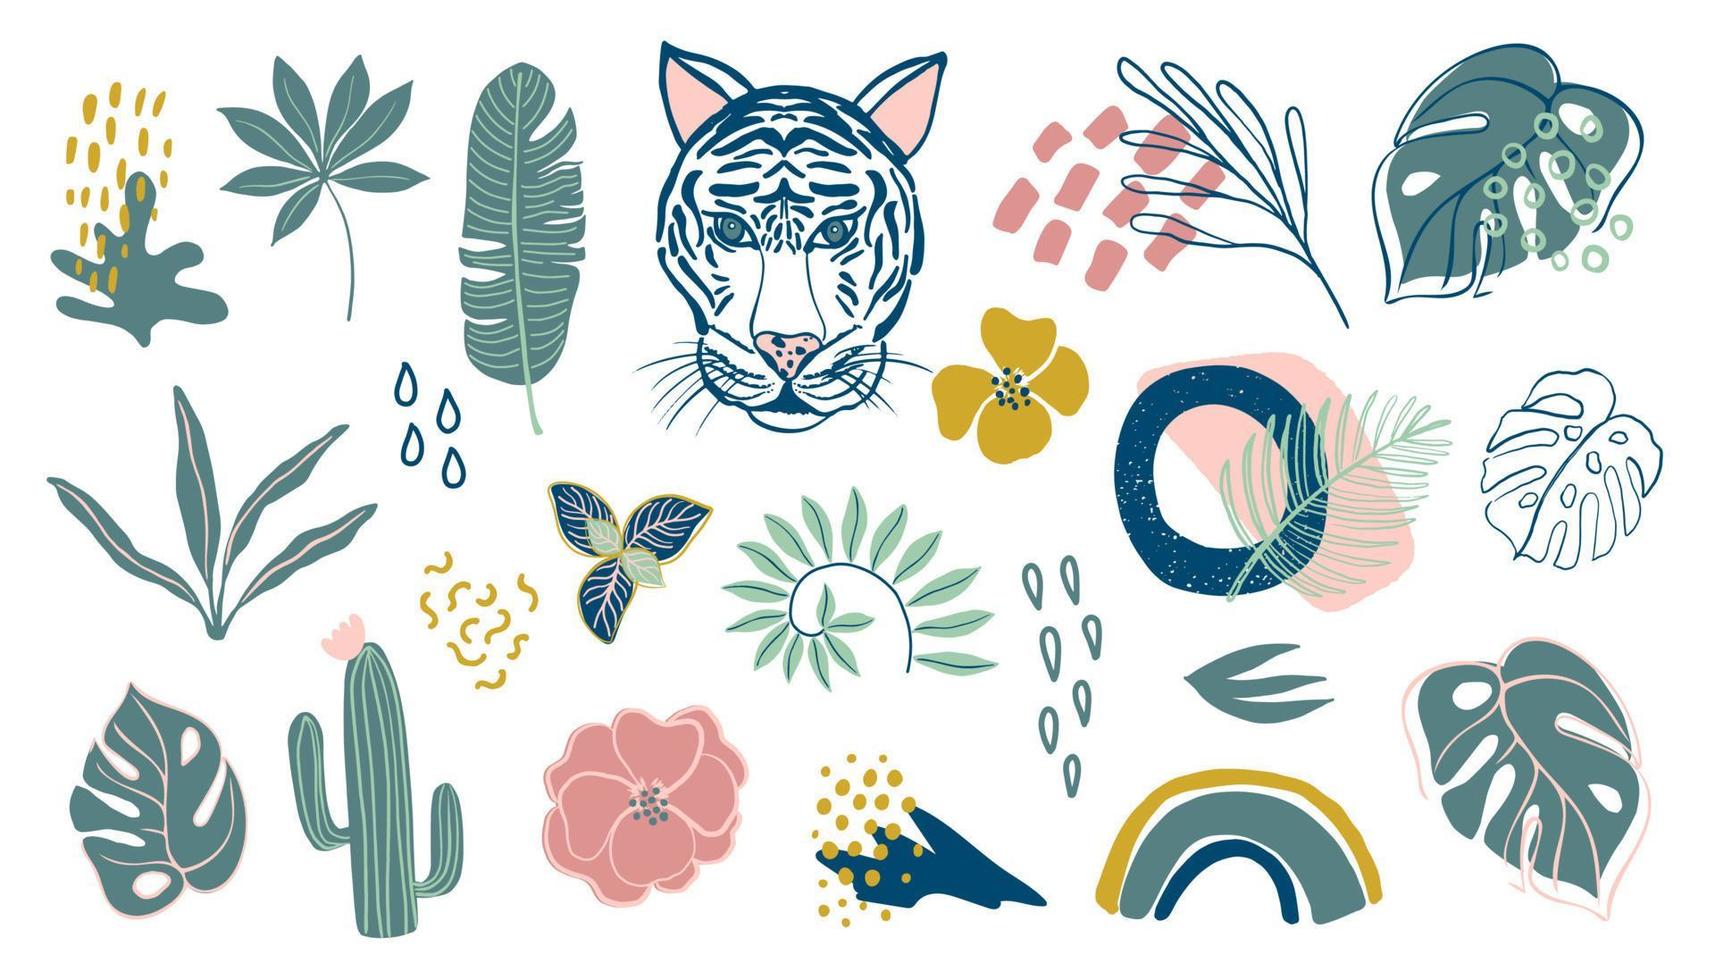 Big set with tropical leaves, cactus, tiger and abstract textures. Plant collection. Digital vector illustrations in simple hand drawn style. All illustrations are isolated.